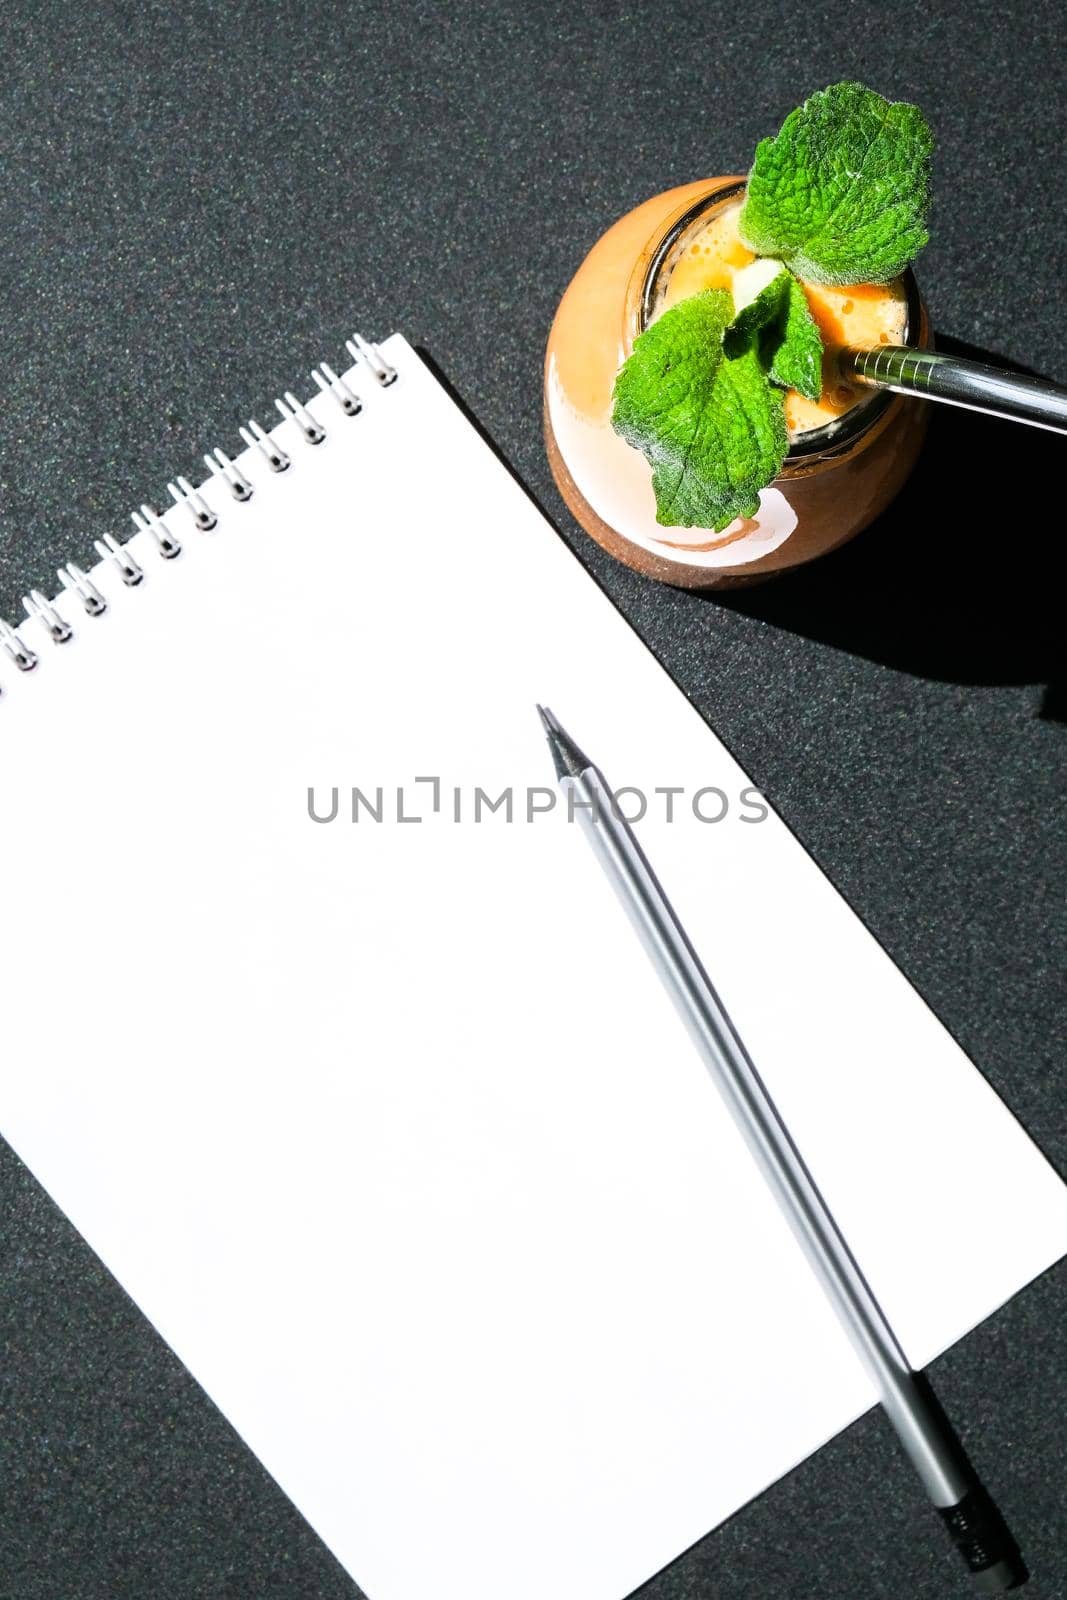 Seasonal pumpkin carrot smoothie drink detox with eco metal drinking straw. Glass bottle of orange smoothie. Paper note copy space. Clean eating, weight loss, healthy dieting food concept. Fruit vegetable drink fitness